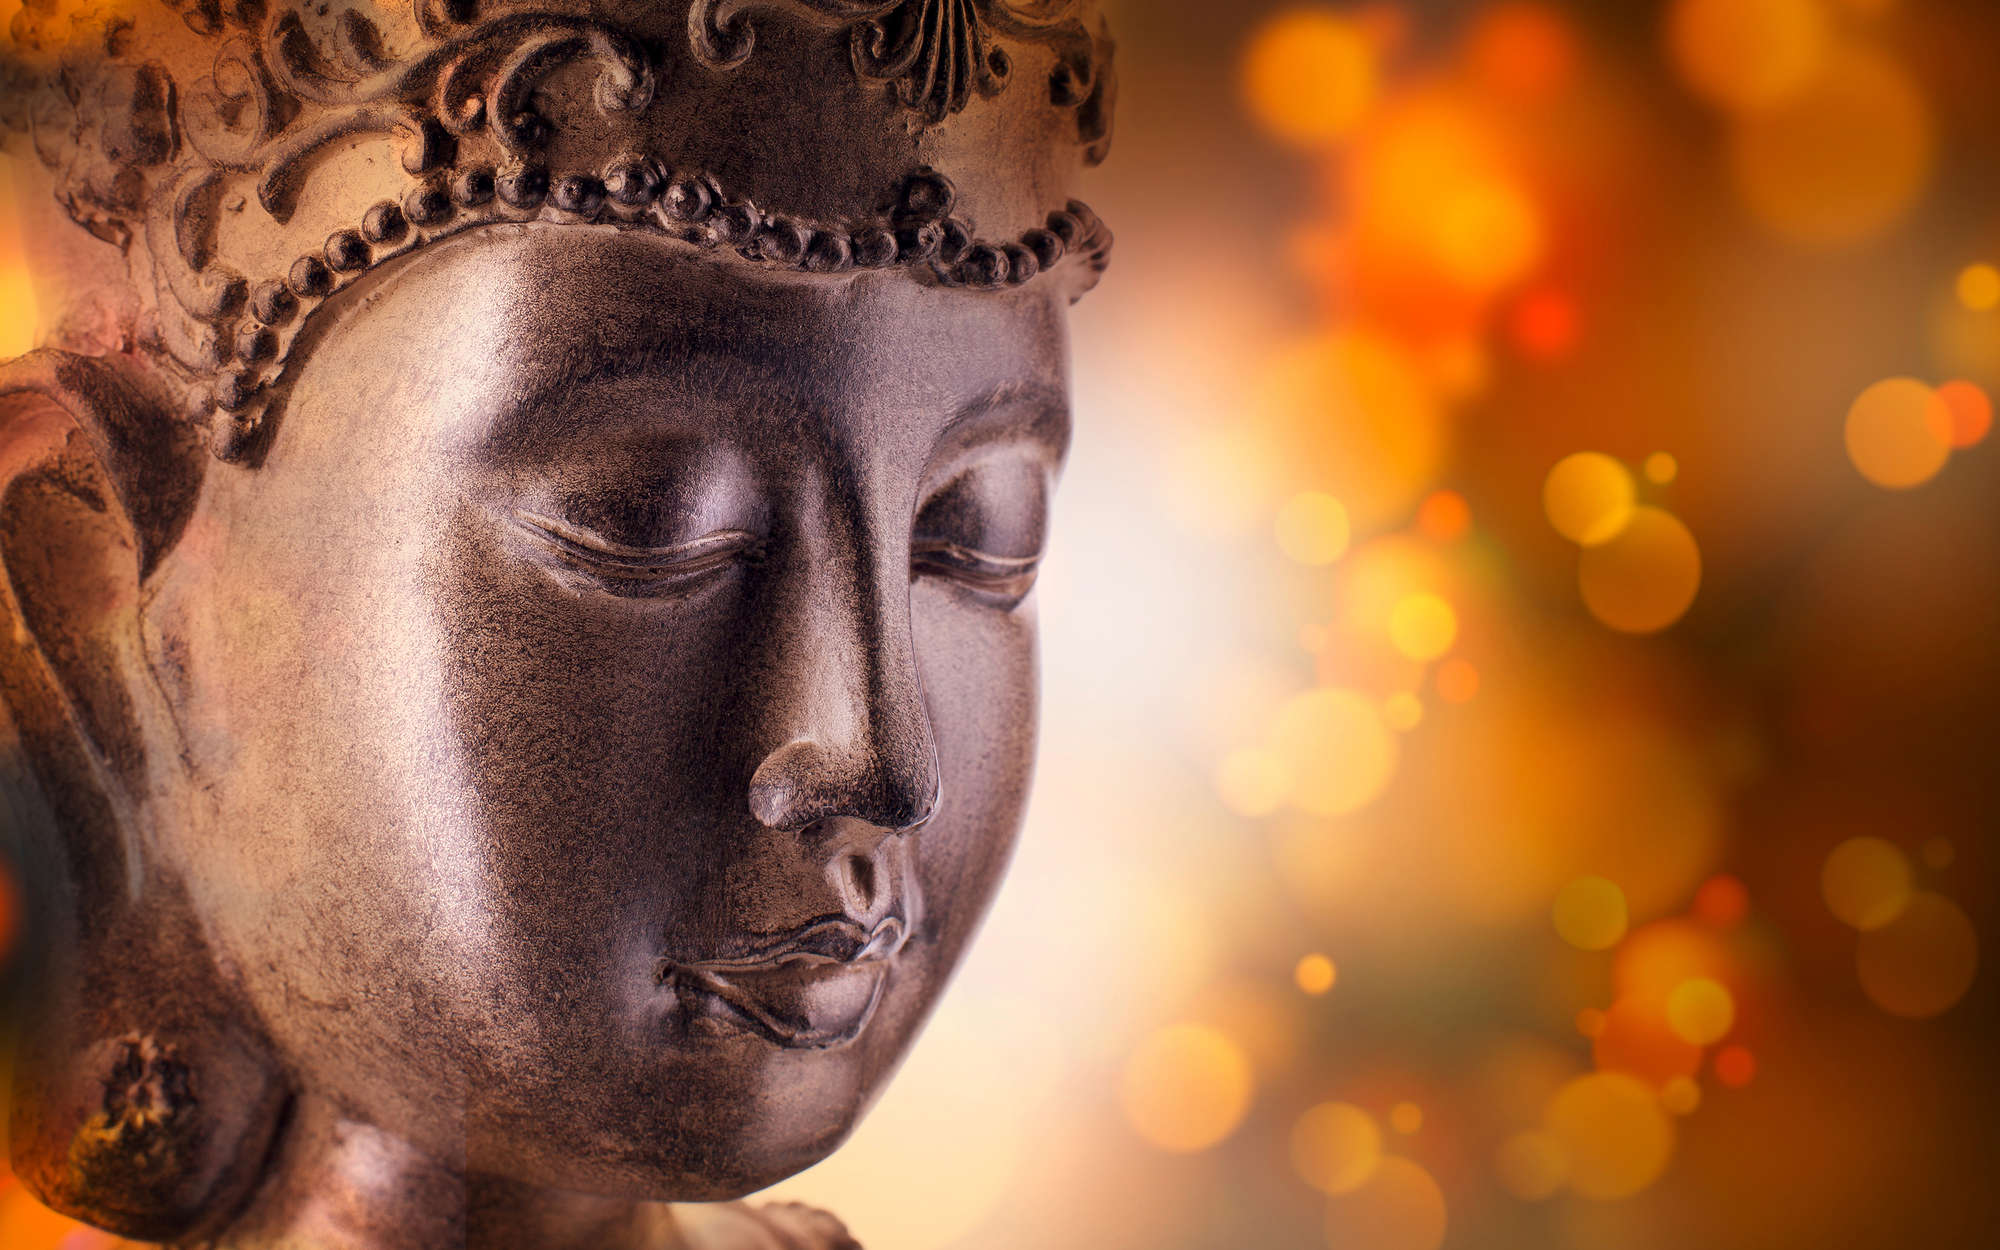             Photo wallpaper detail of Buddha statue - mother-of-pearl smooth non-woven
        